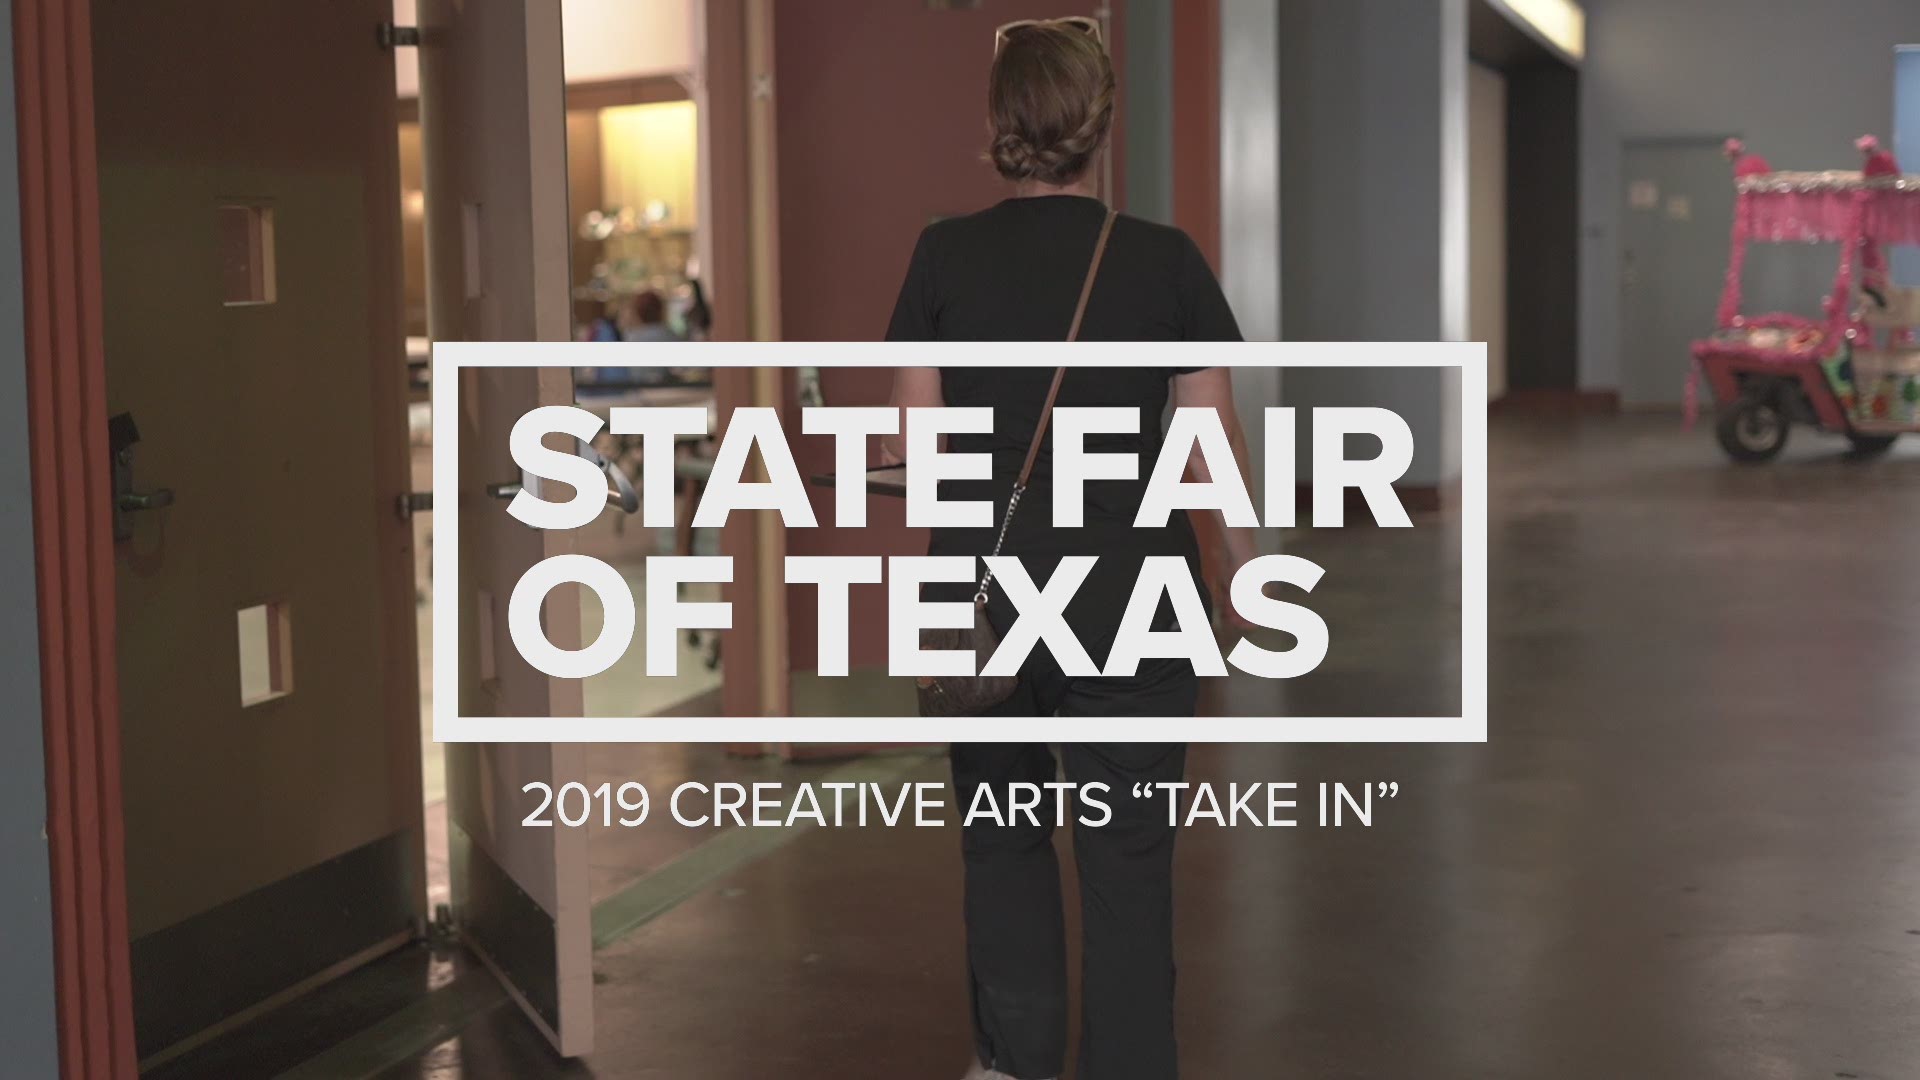 A sneak peek at the State Fair of Texas' Creative Arts entires for 2019